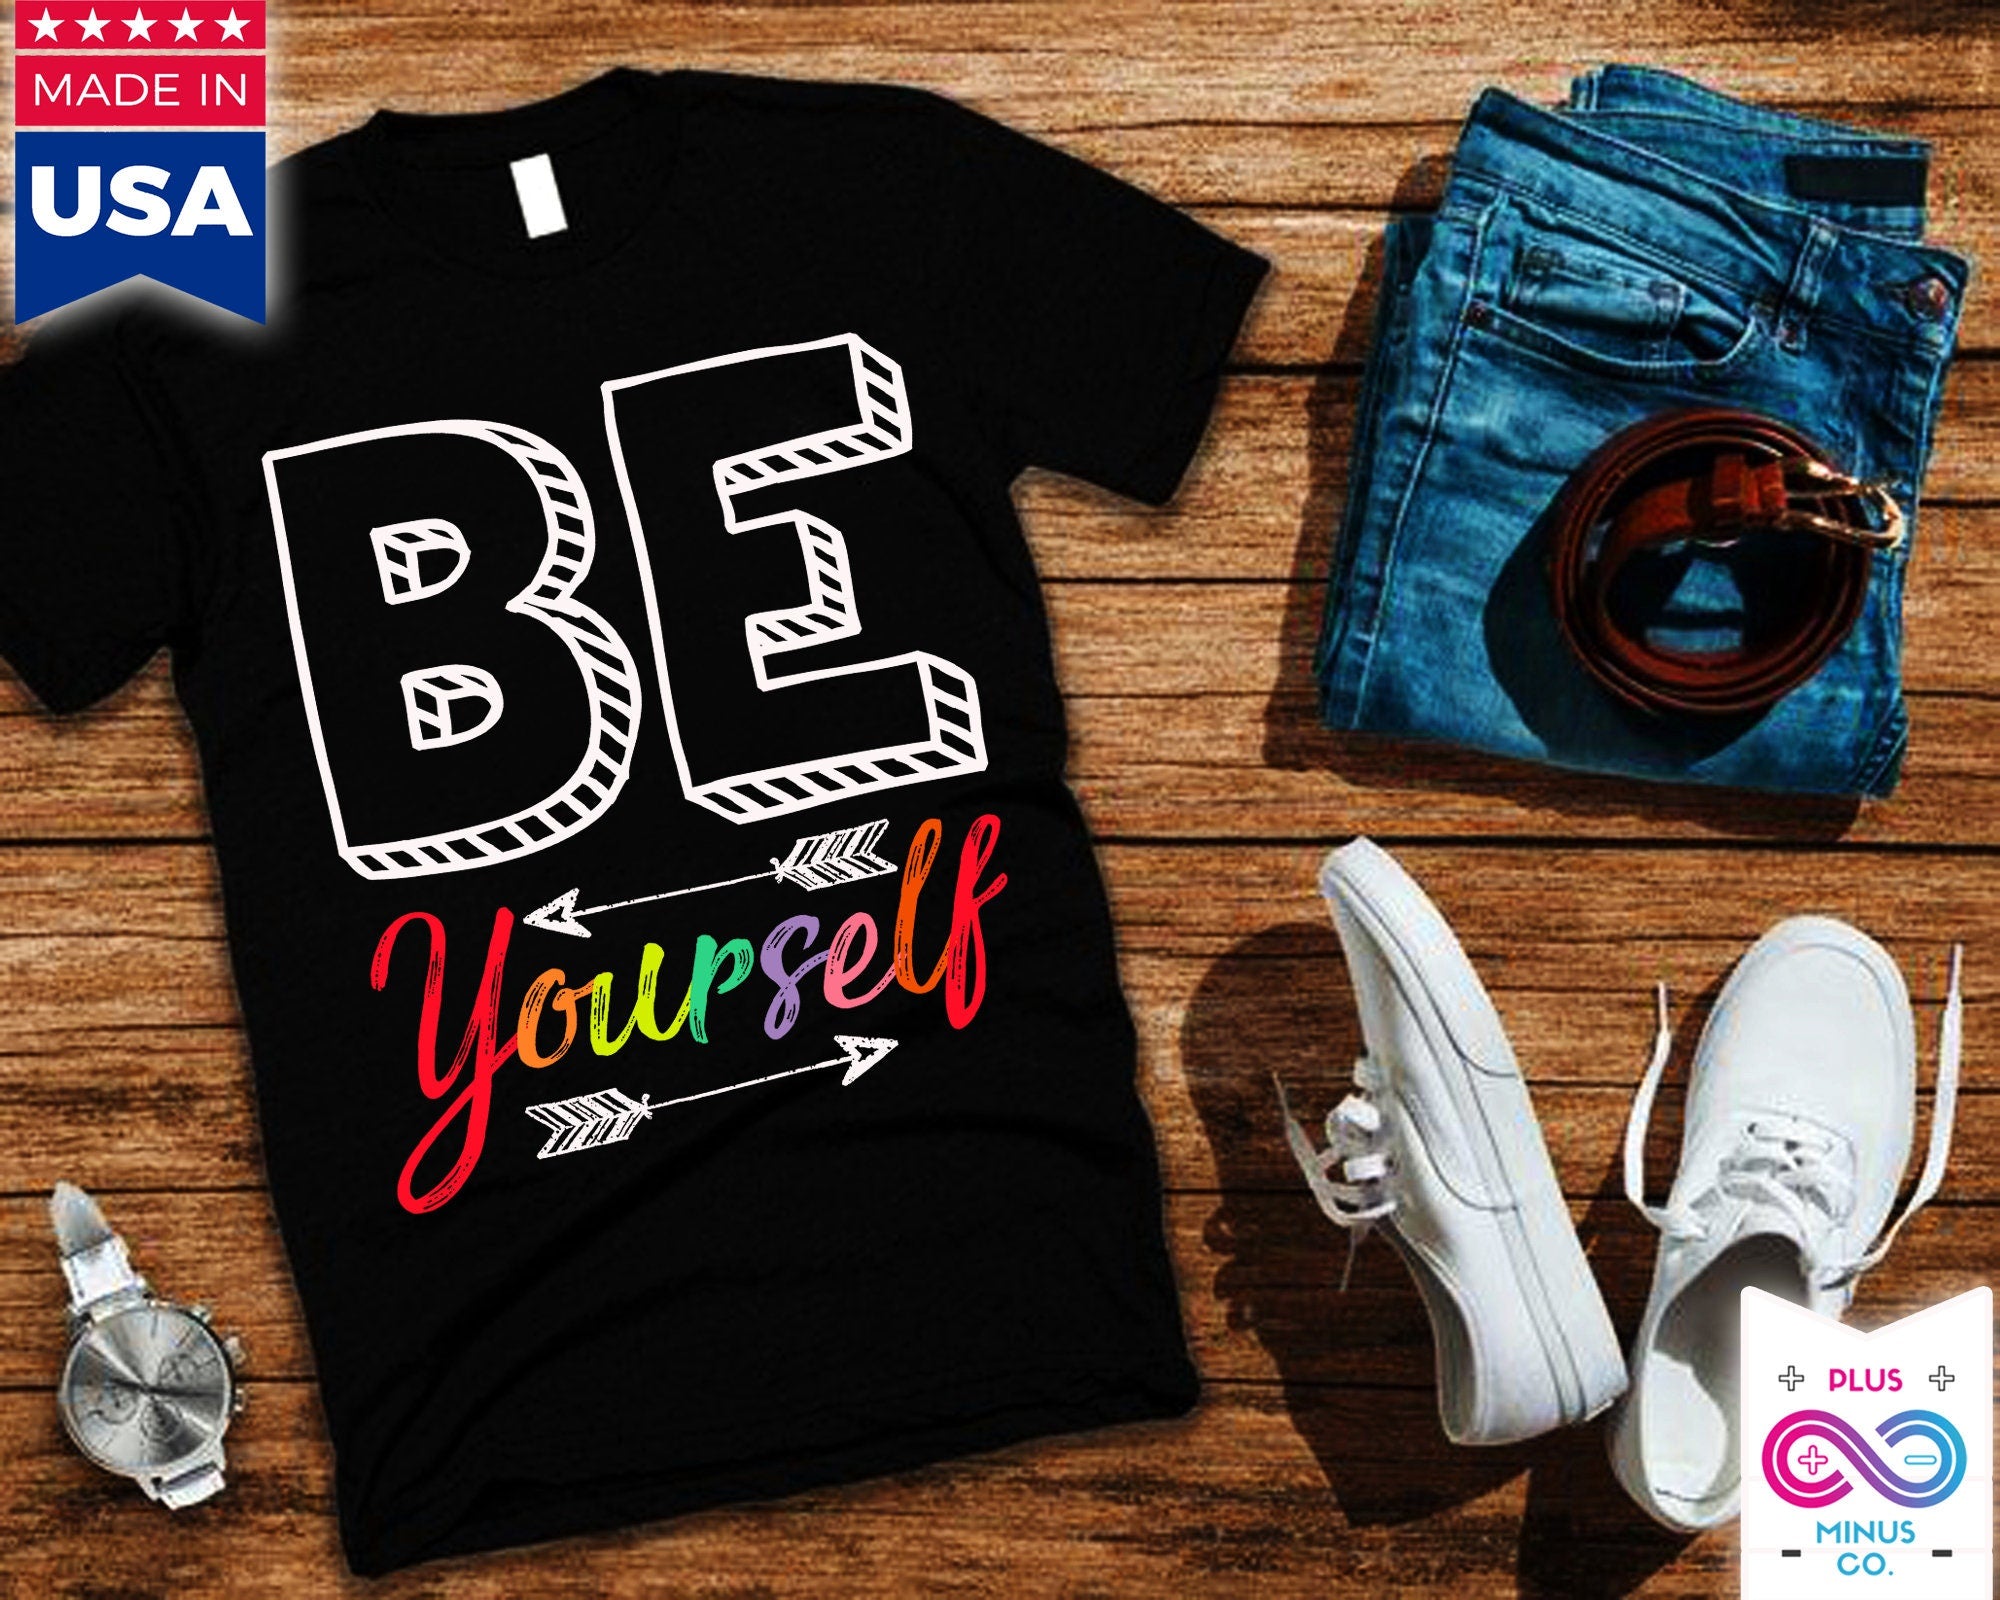 Be Yourself T-skjorter, Be Yourself Unisex T-skjorte med rund hals, Trendy T-skjorter, Be You-skjorte, Motivasjonsskjorte, Inspirasjonsskjorte, Gave - plusminusco.com